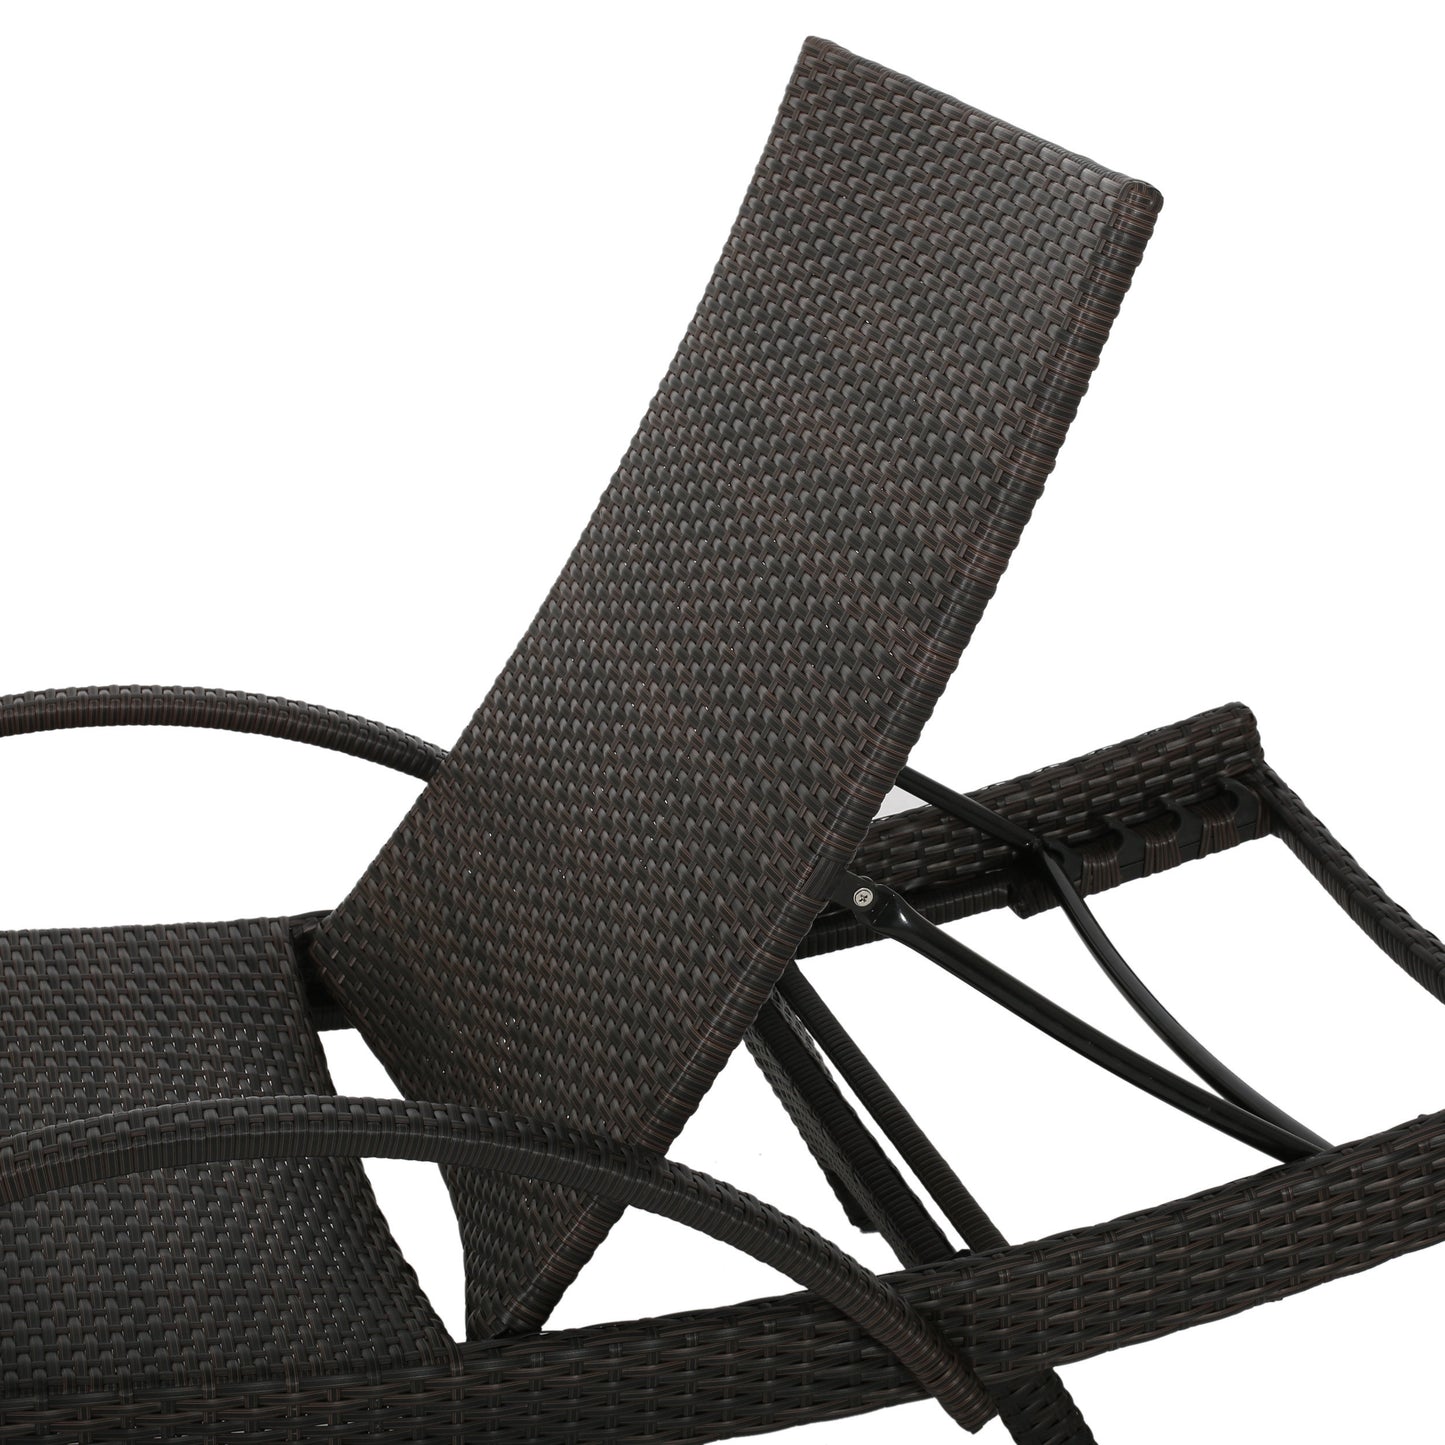 Lakeport Outdoor Brown Wicker 3-piece Adjustable Armed Chaise Lounge Set